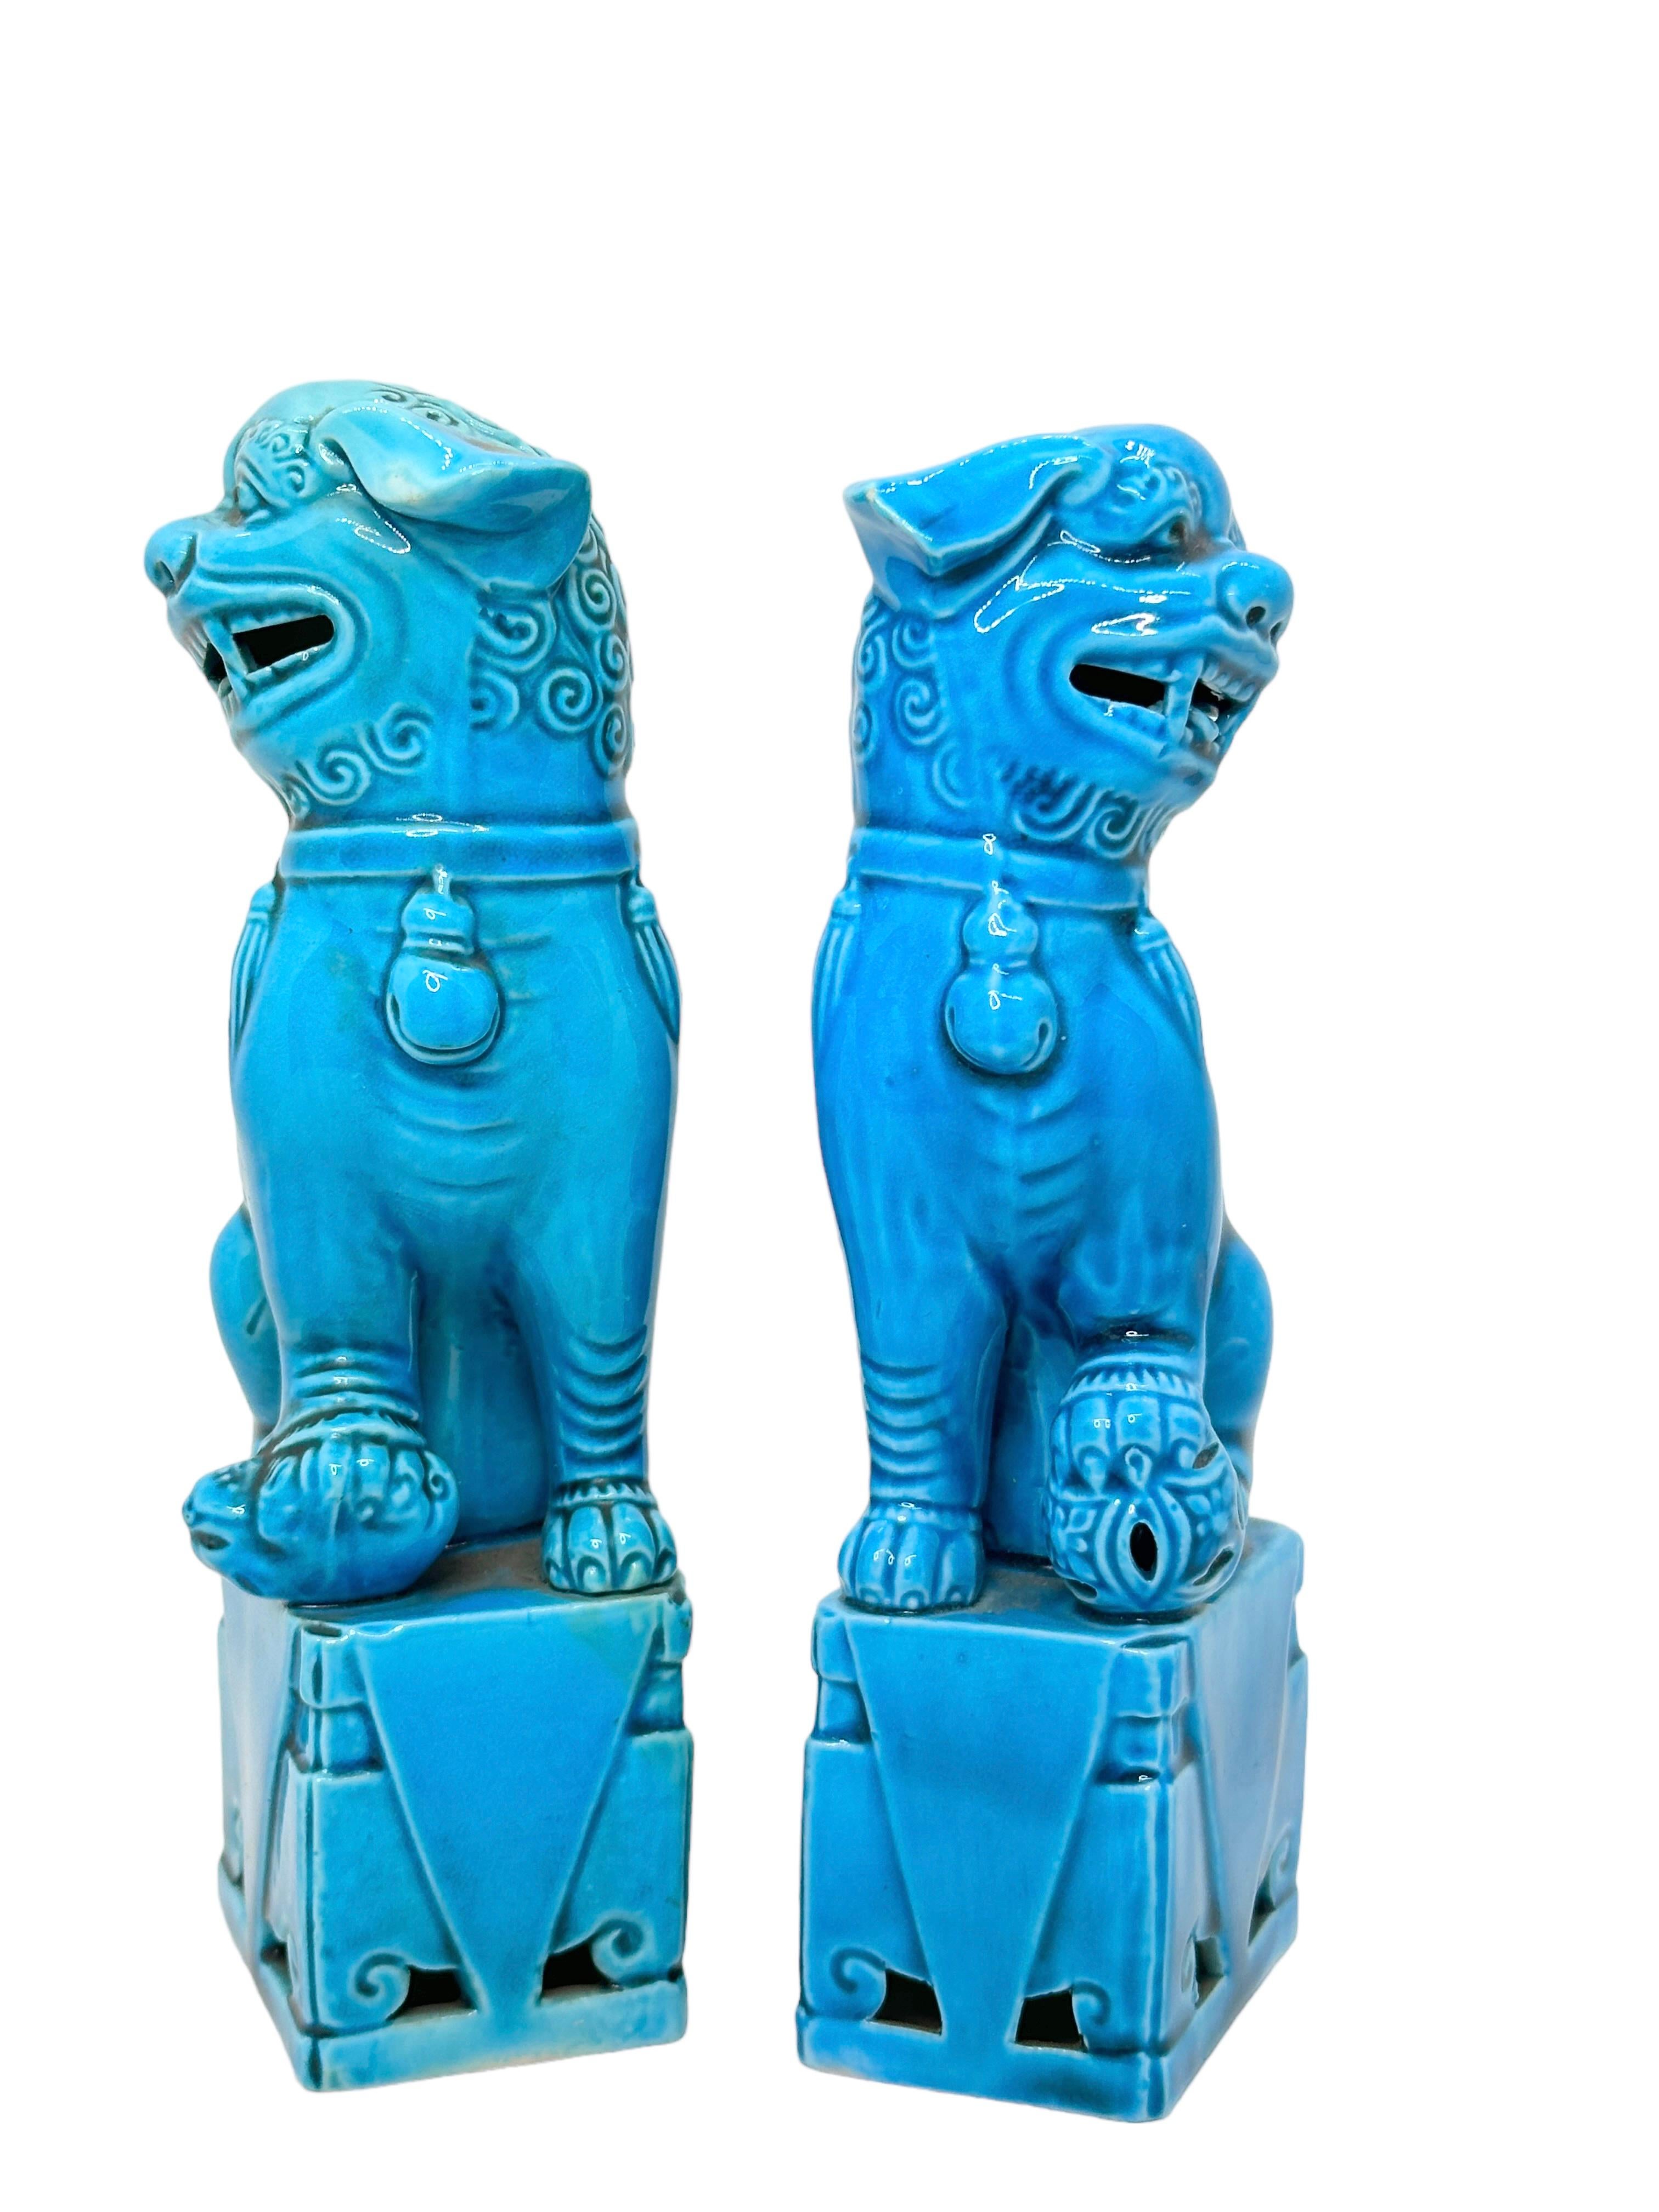 A very nice pair of vintage, medium size, turquoise blue, ceramic foo dogs, circa 1960s. Excellent condition and patina; makes a fun decor item in any room!